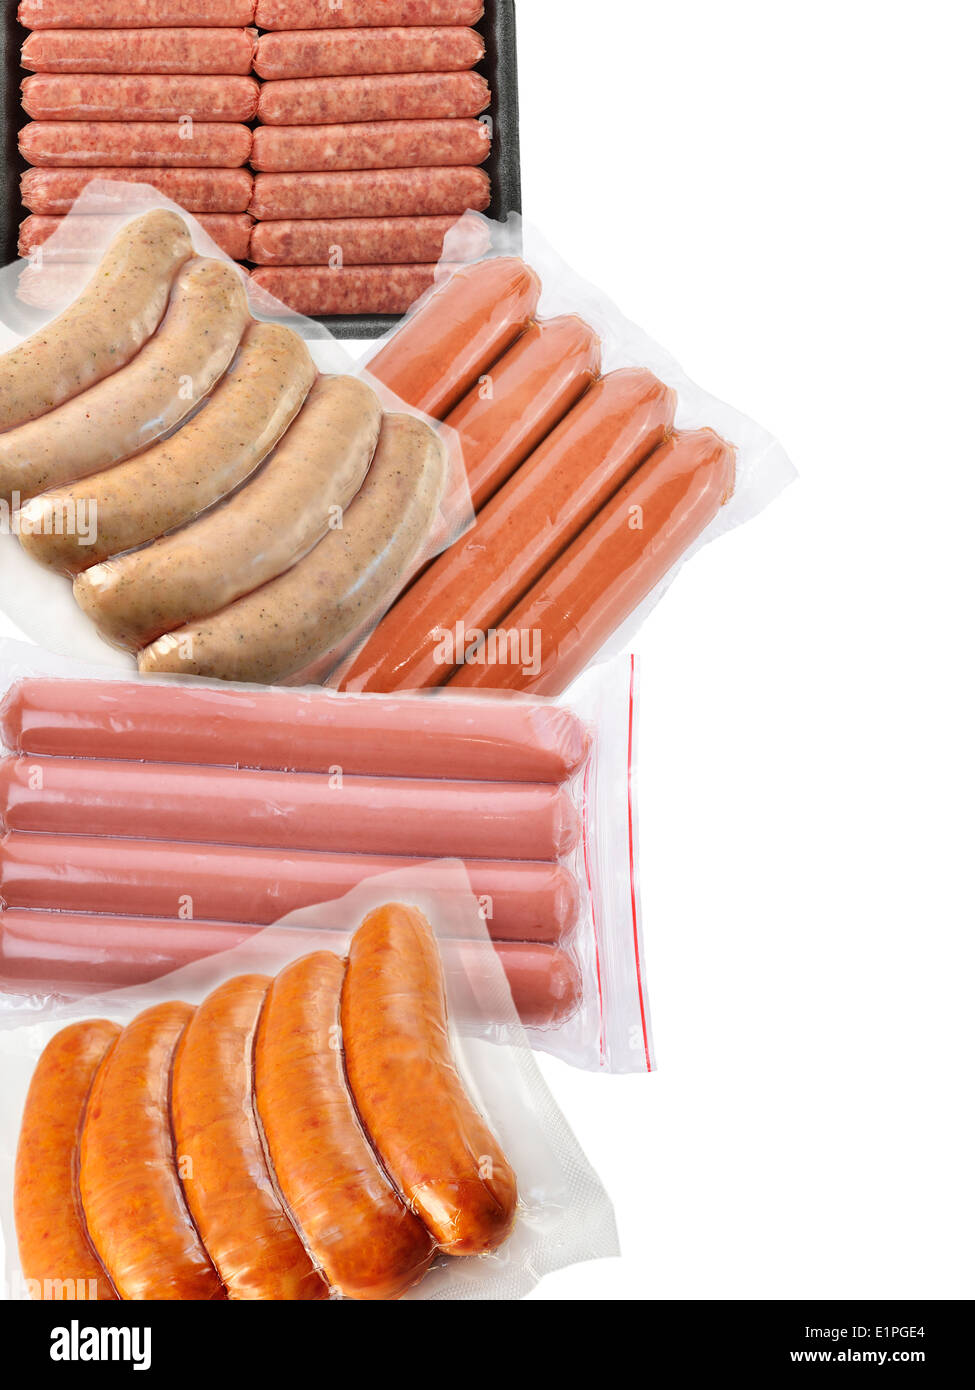 Sausages Isolated On White Background Stock Photo